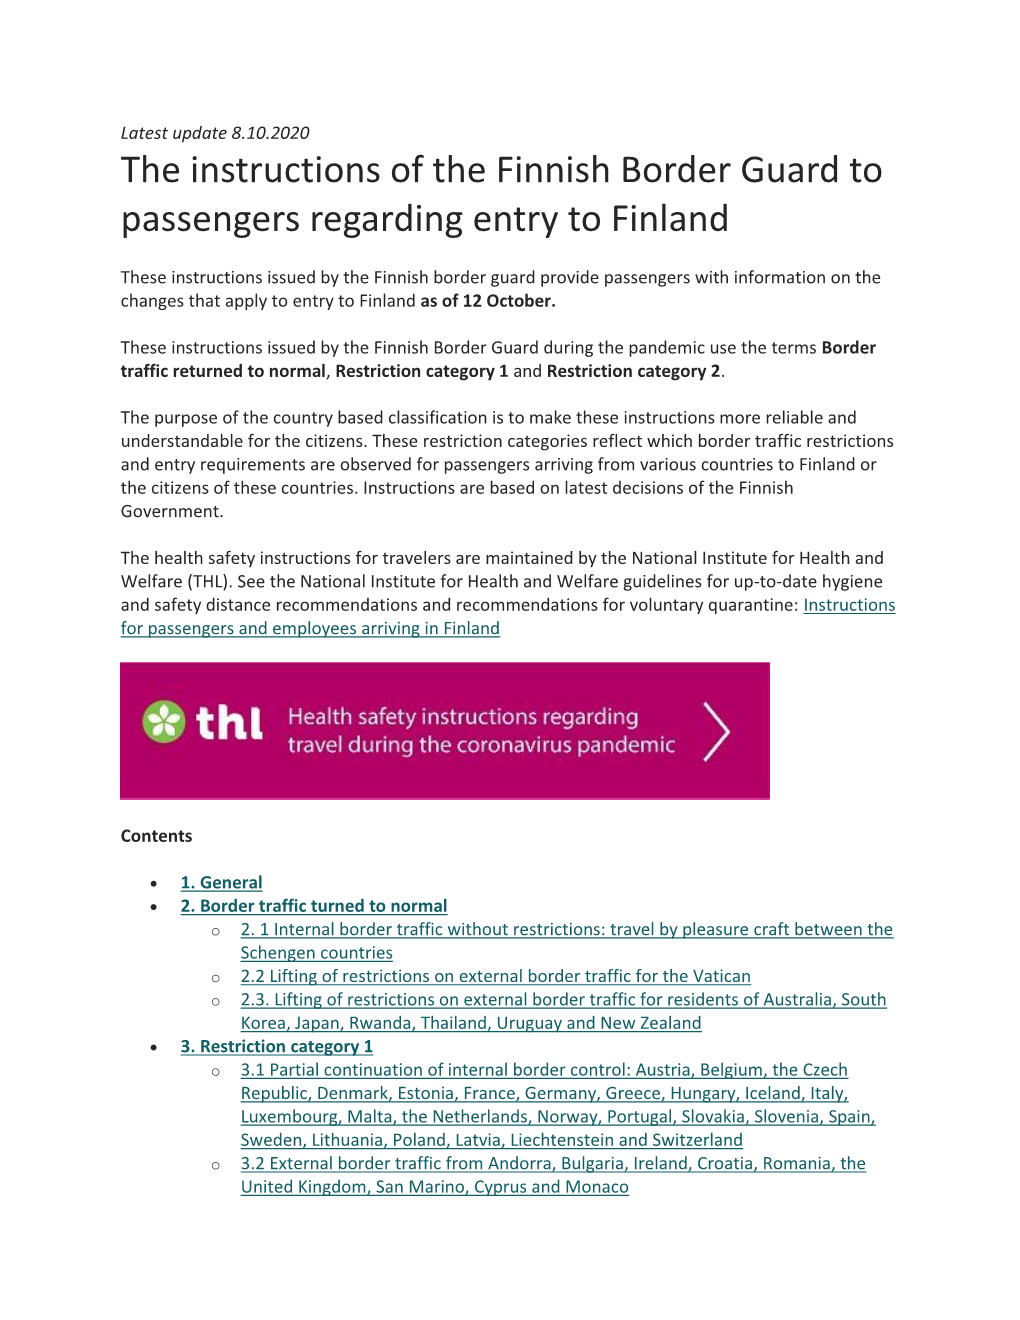 The Instructions of the Finnish Border Guard to Passengers Regarding Entry to Finland